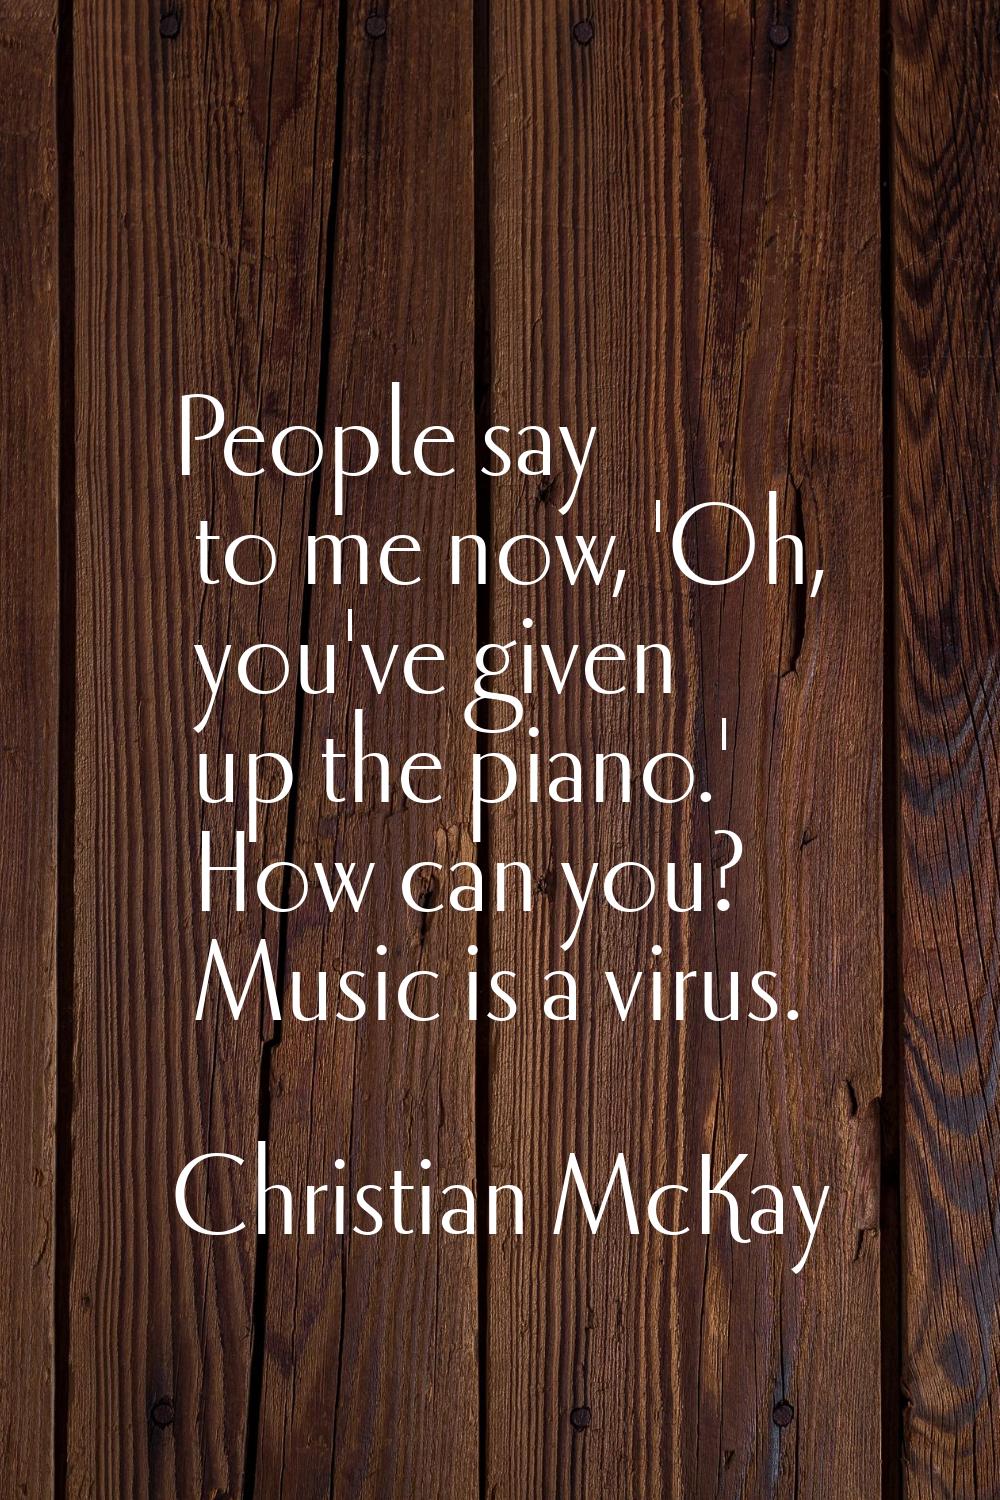 People say to me now, 'Oh, you've given up the piano.' How can you? Music is a virus.